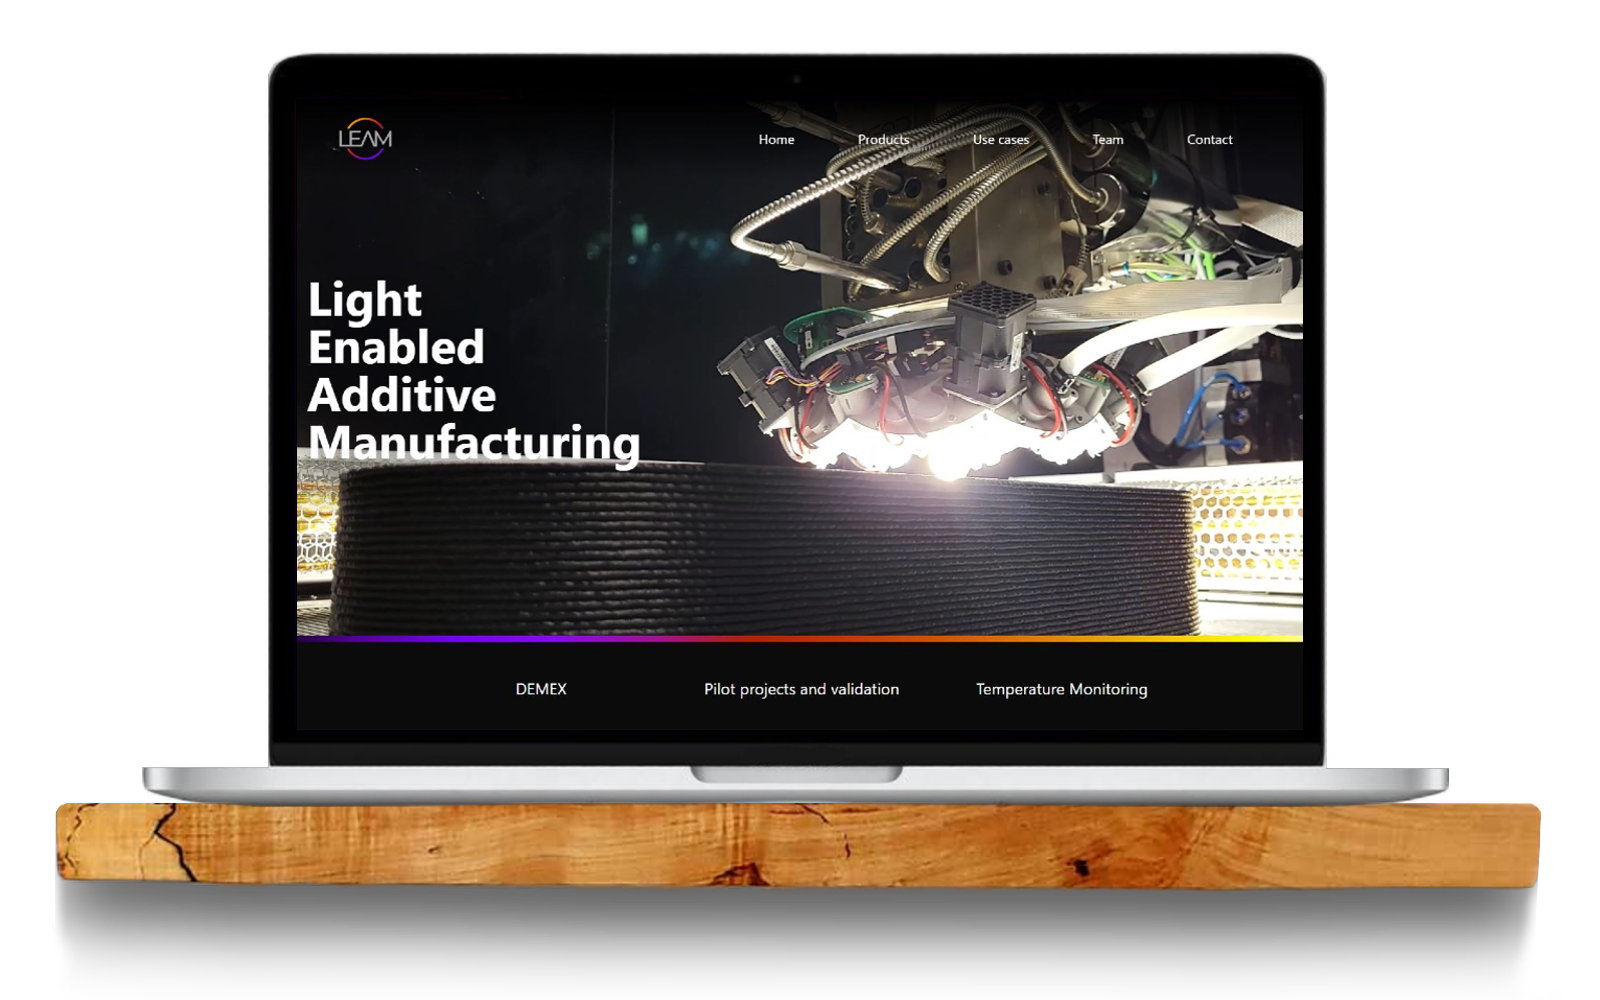 Light enabled additive manufacturing